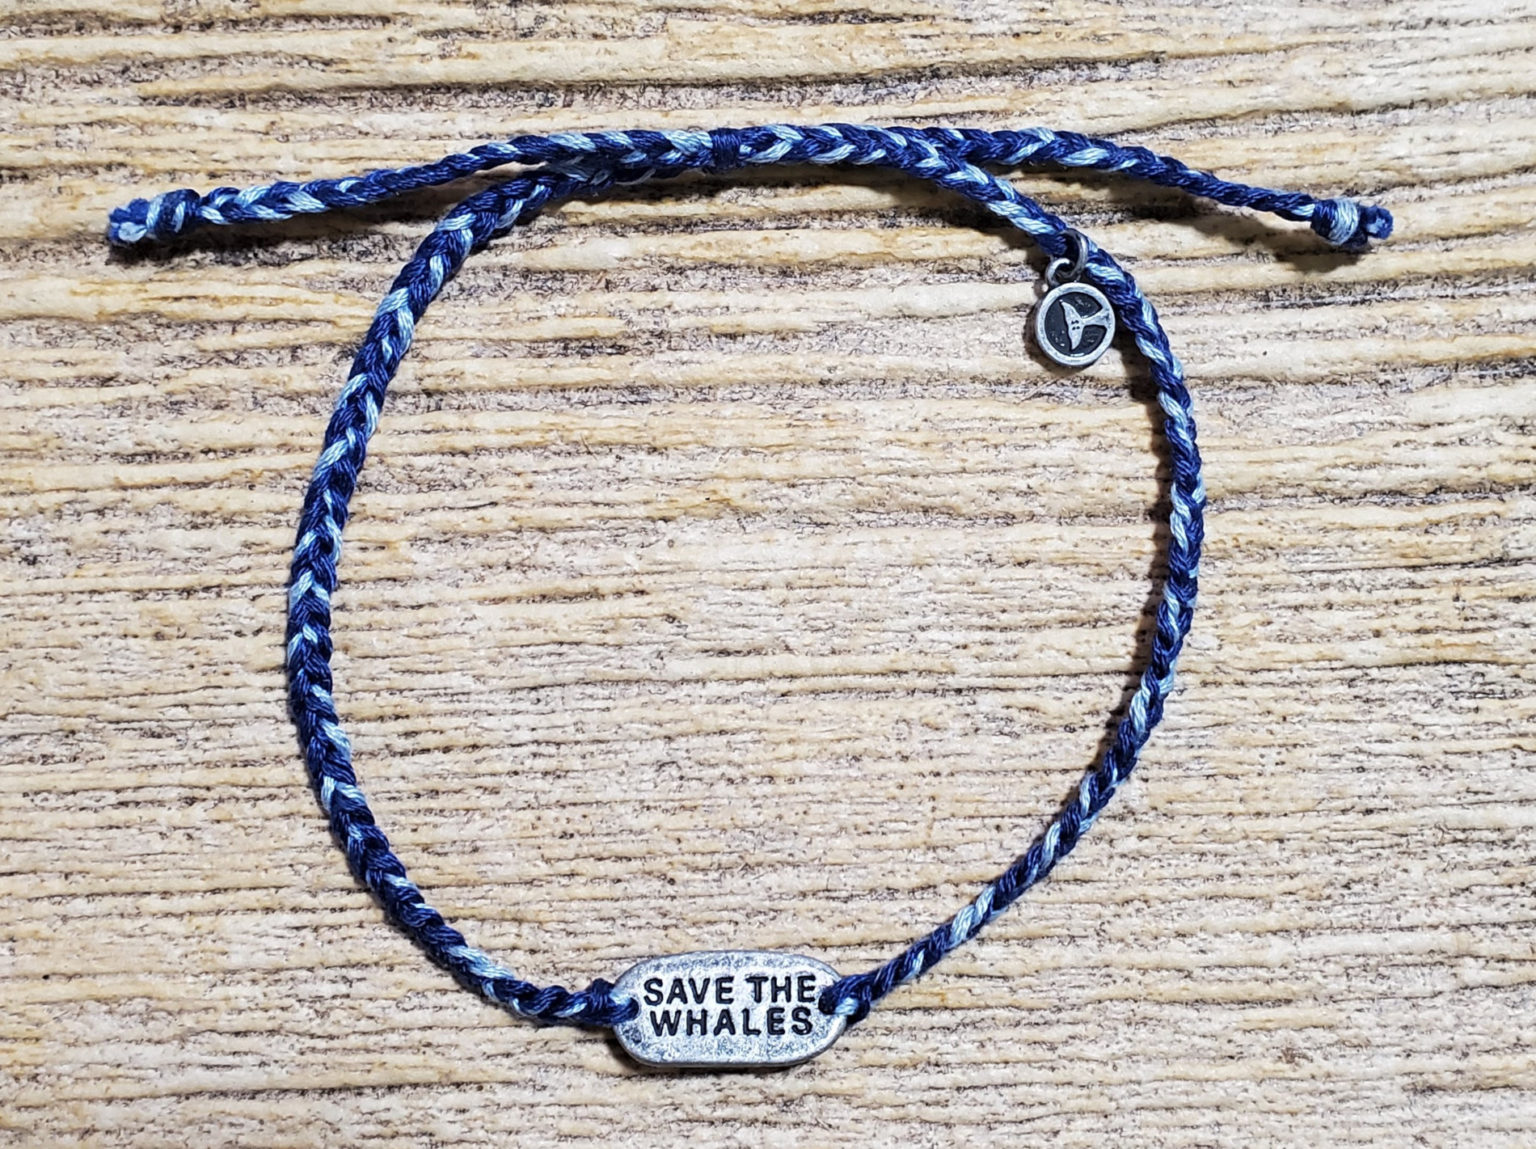 Save the Whales Bracelet - Store - Marine Life Rescue Project™